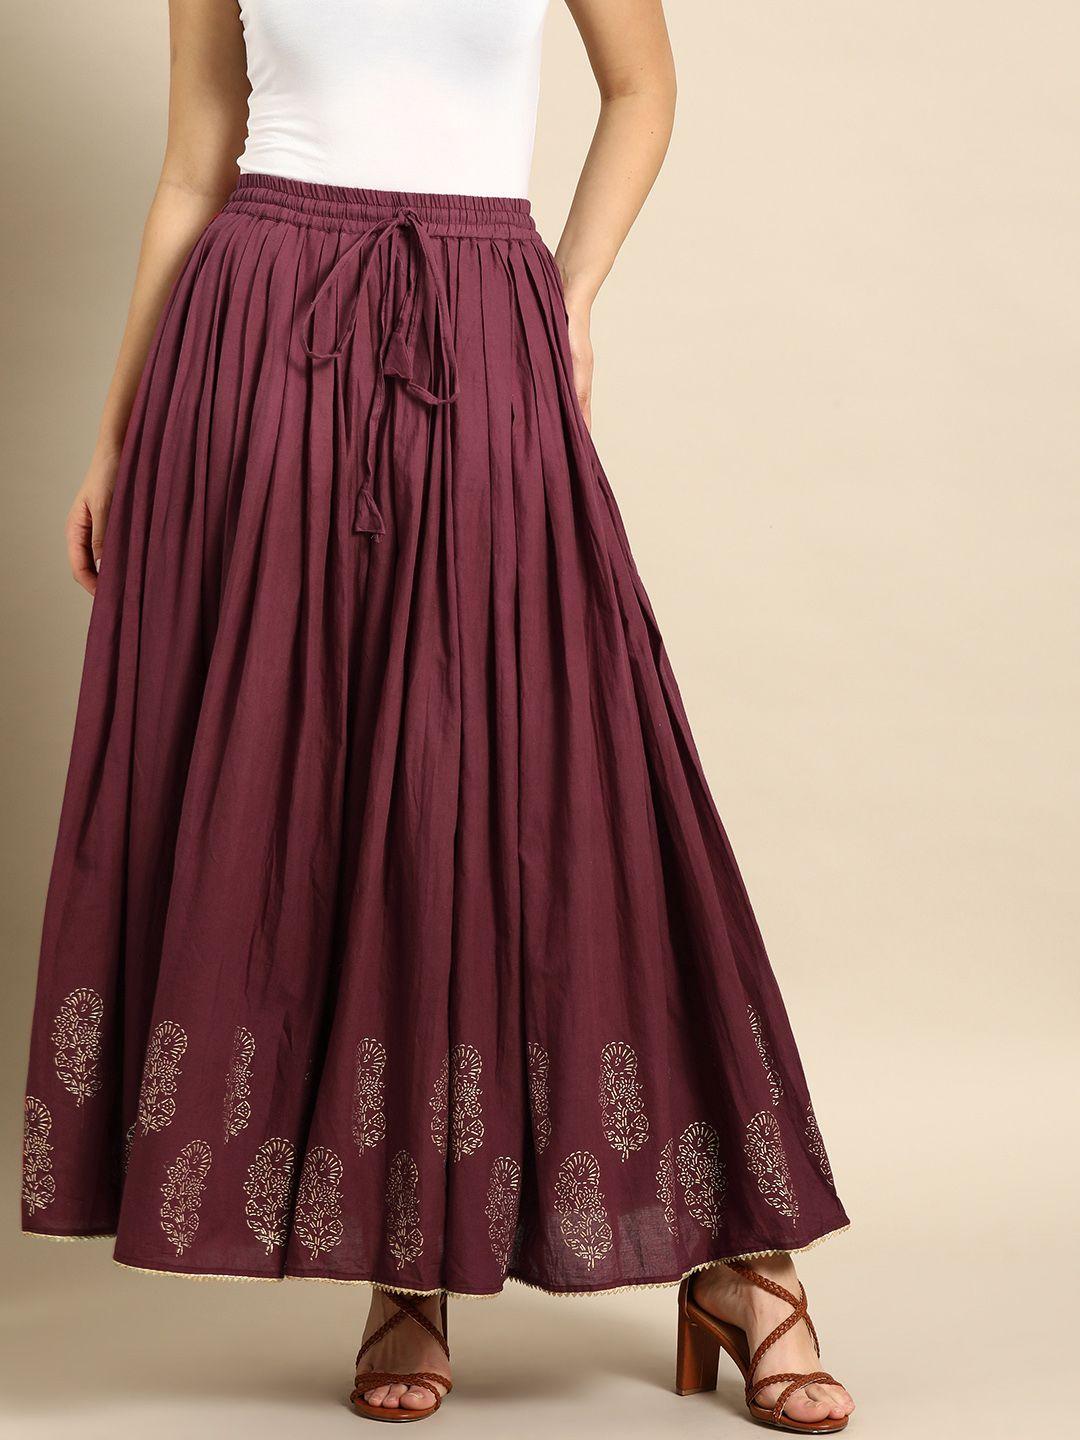 soch maroon & gold-toned printed flared skirt